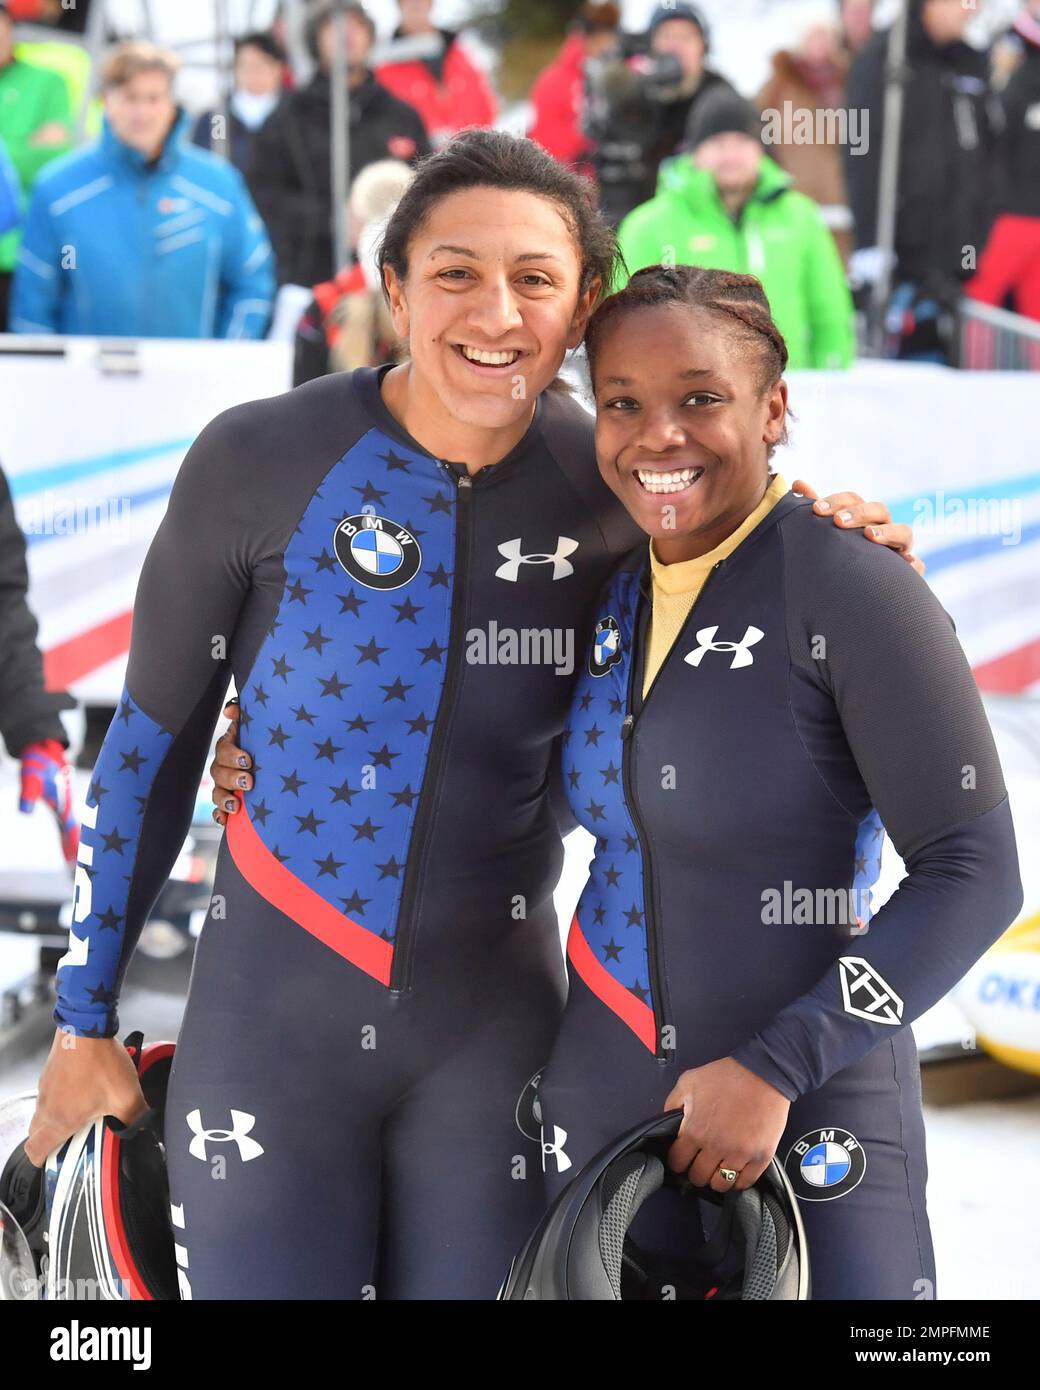 Second placed Elana Meyers Taylor, lrgy, and Kehri Jones of the United  States pose for media after the women's bobsled World Cup race in  Innsbruck, Saturday, Dec. 16, 2017. (AP Photo/Kerstin Joensson